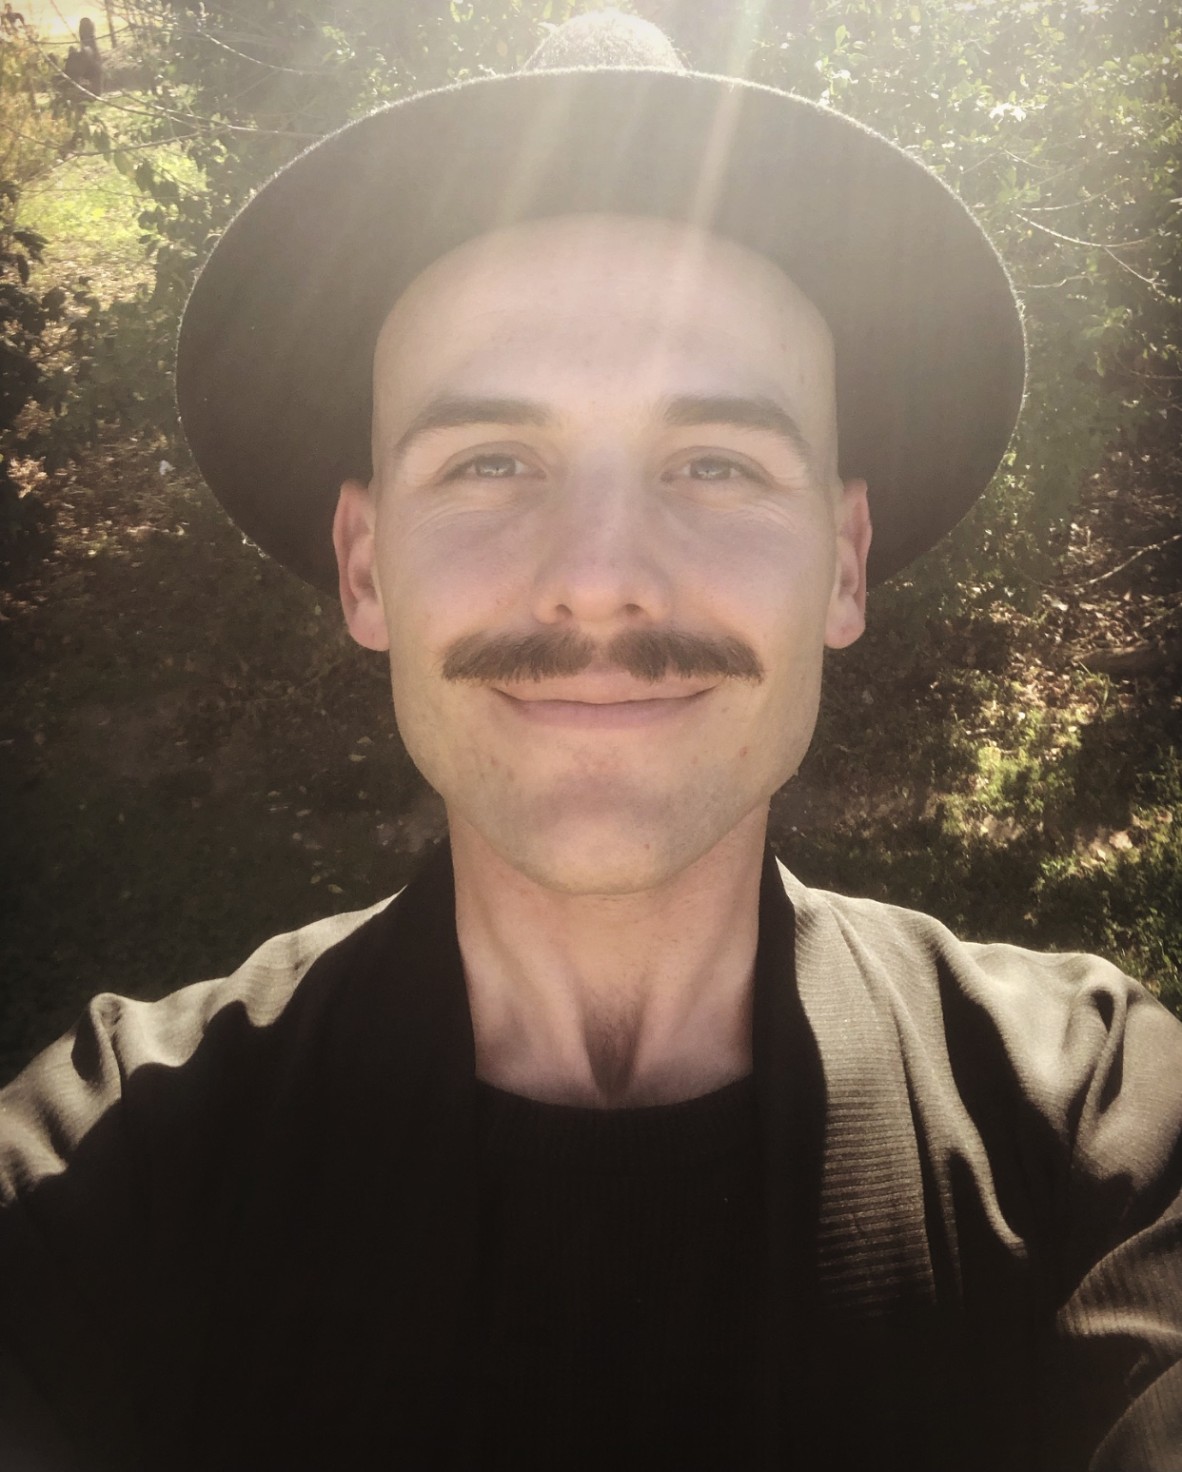 A selfie of Darby Jones who is wearing a black jacket and hat He is smiling at the camera with sun and a tree behind him